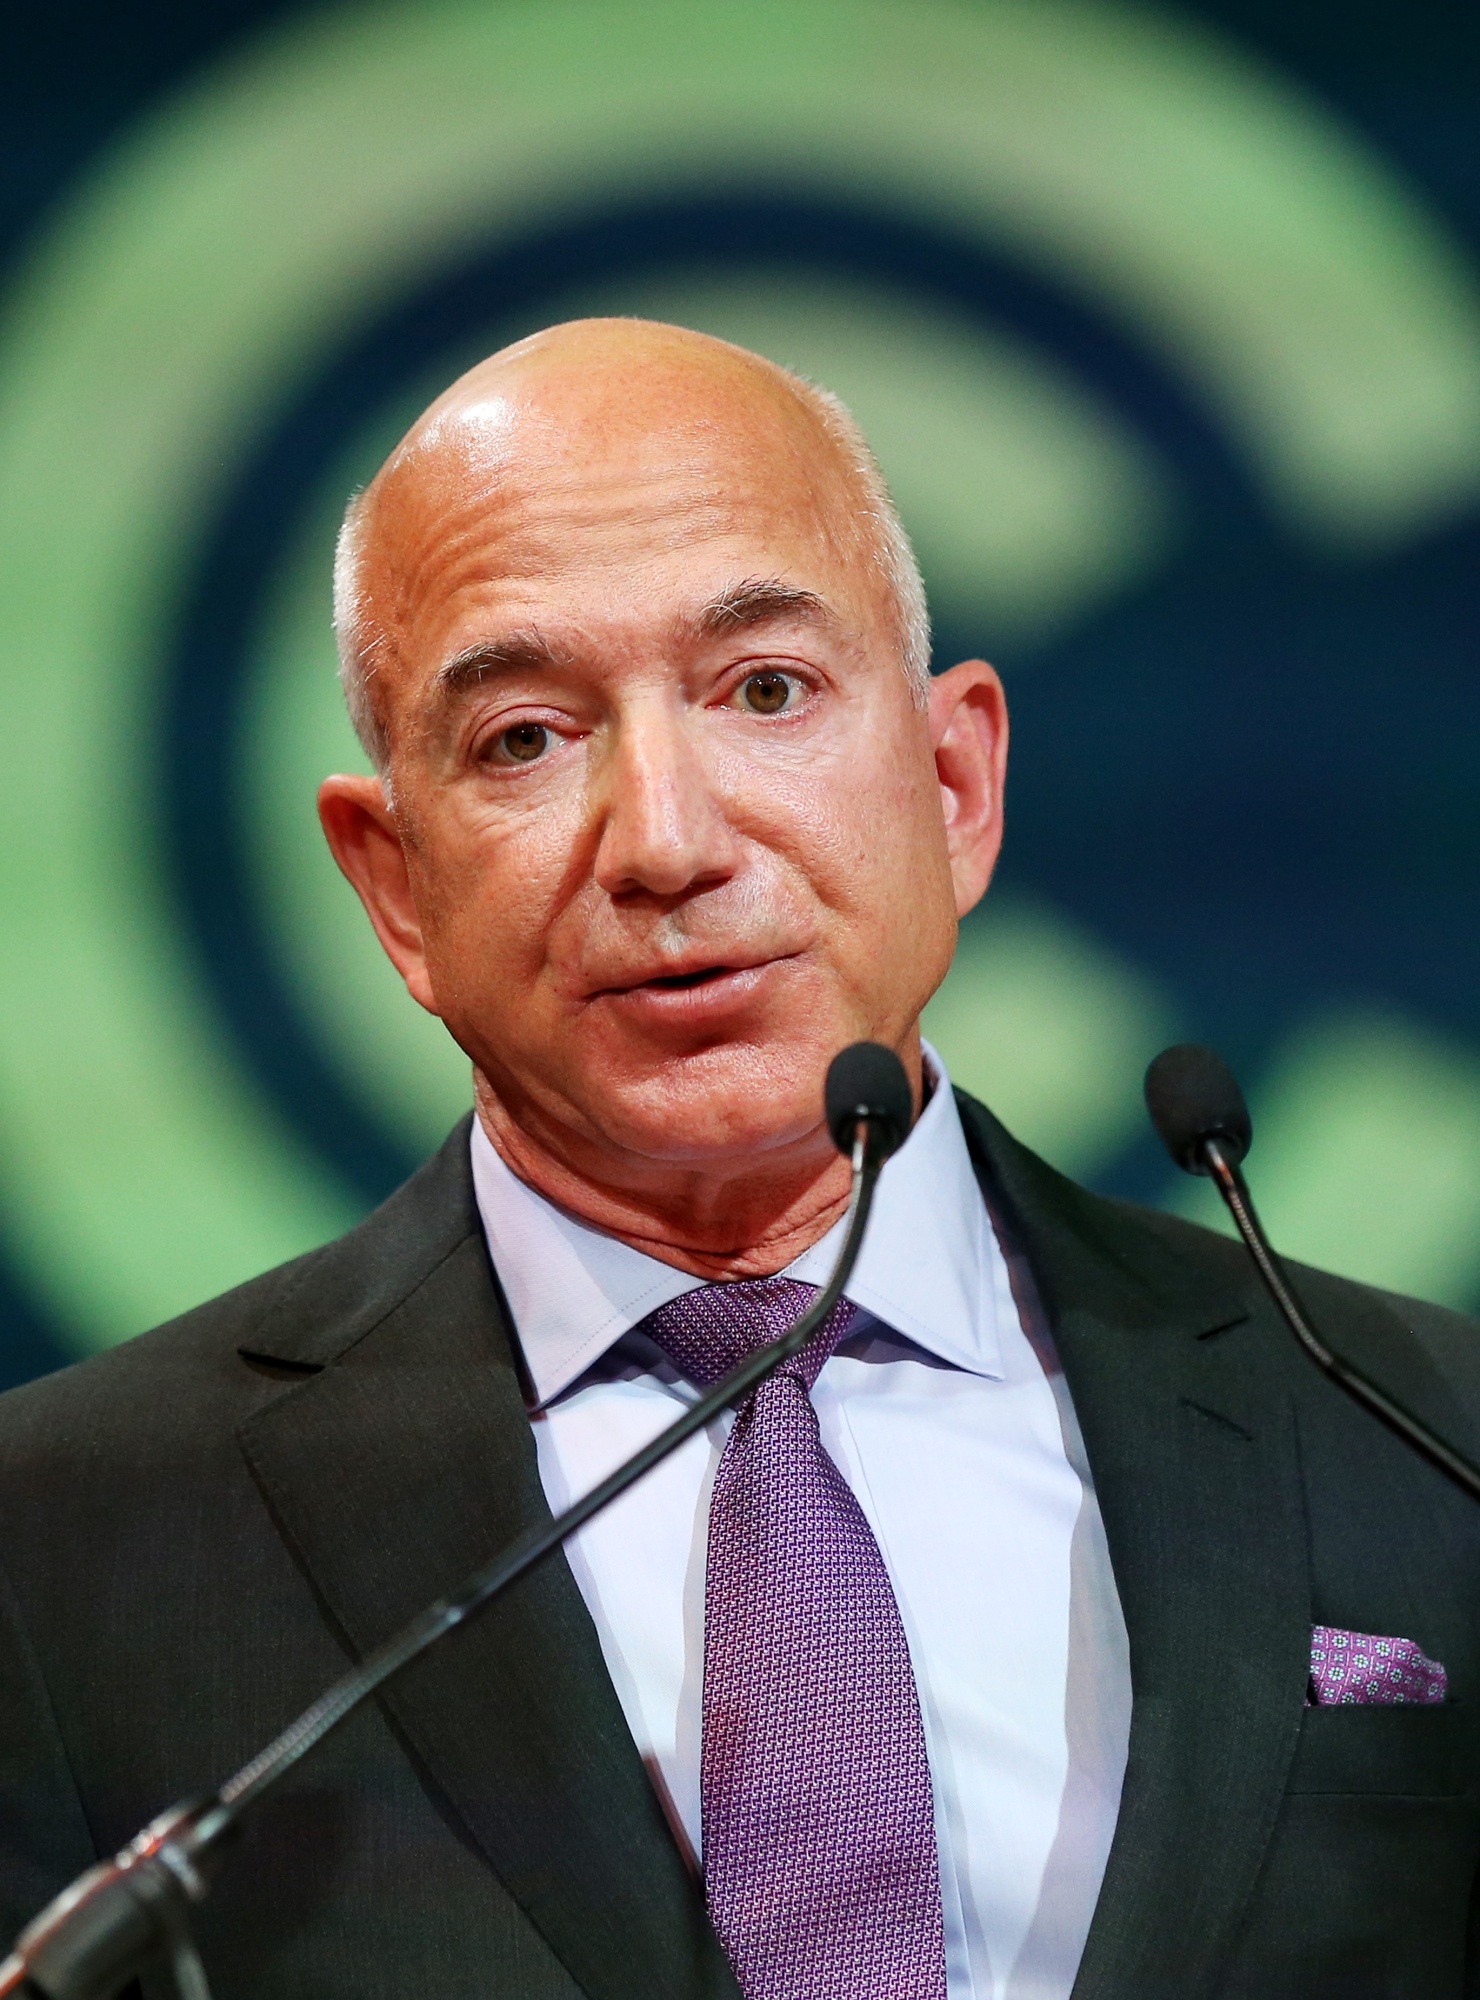 Jeff Bezos Net Worth Set to Plunge After Amazon's Stock Wipeout Bloomberg